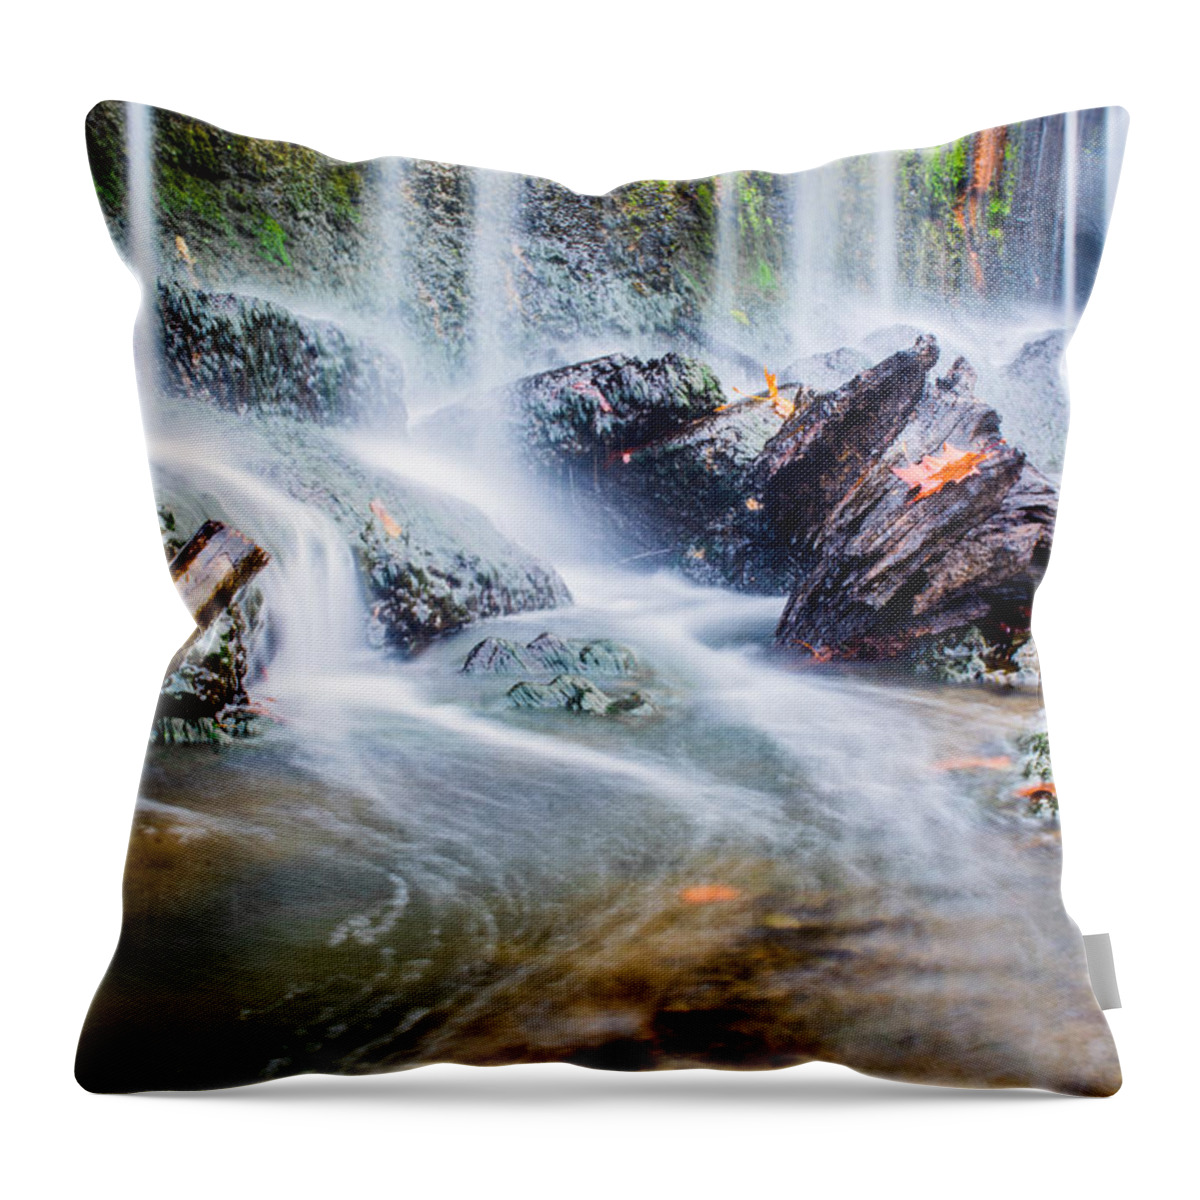 Water Throw Pillow featuring the photograph Rushing Water by Parker Cunningham